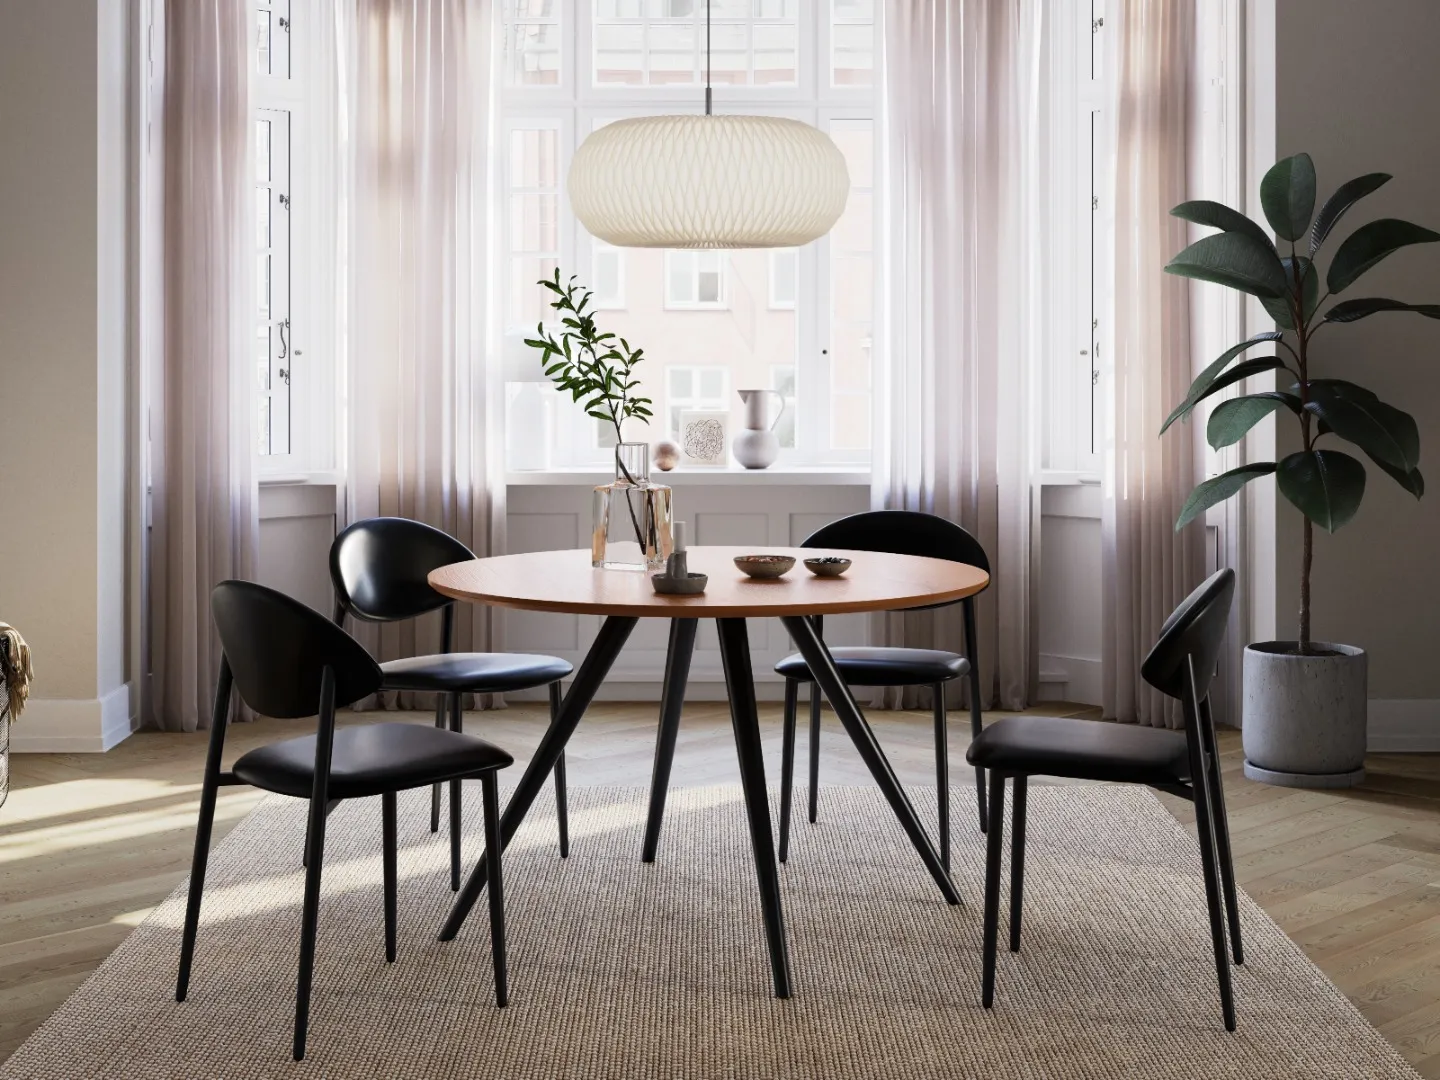 DAN-FORM's TUSH chairs in vintage black artificial leather around the round ECLIPSE table